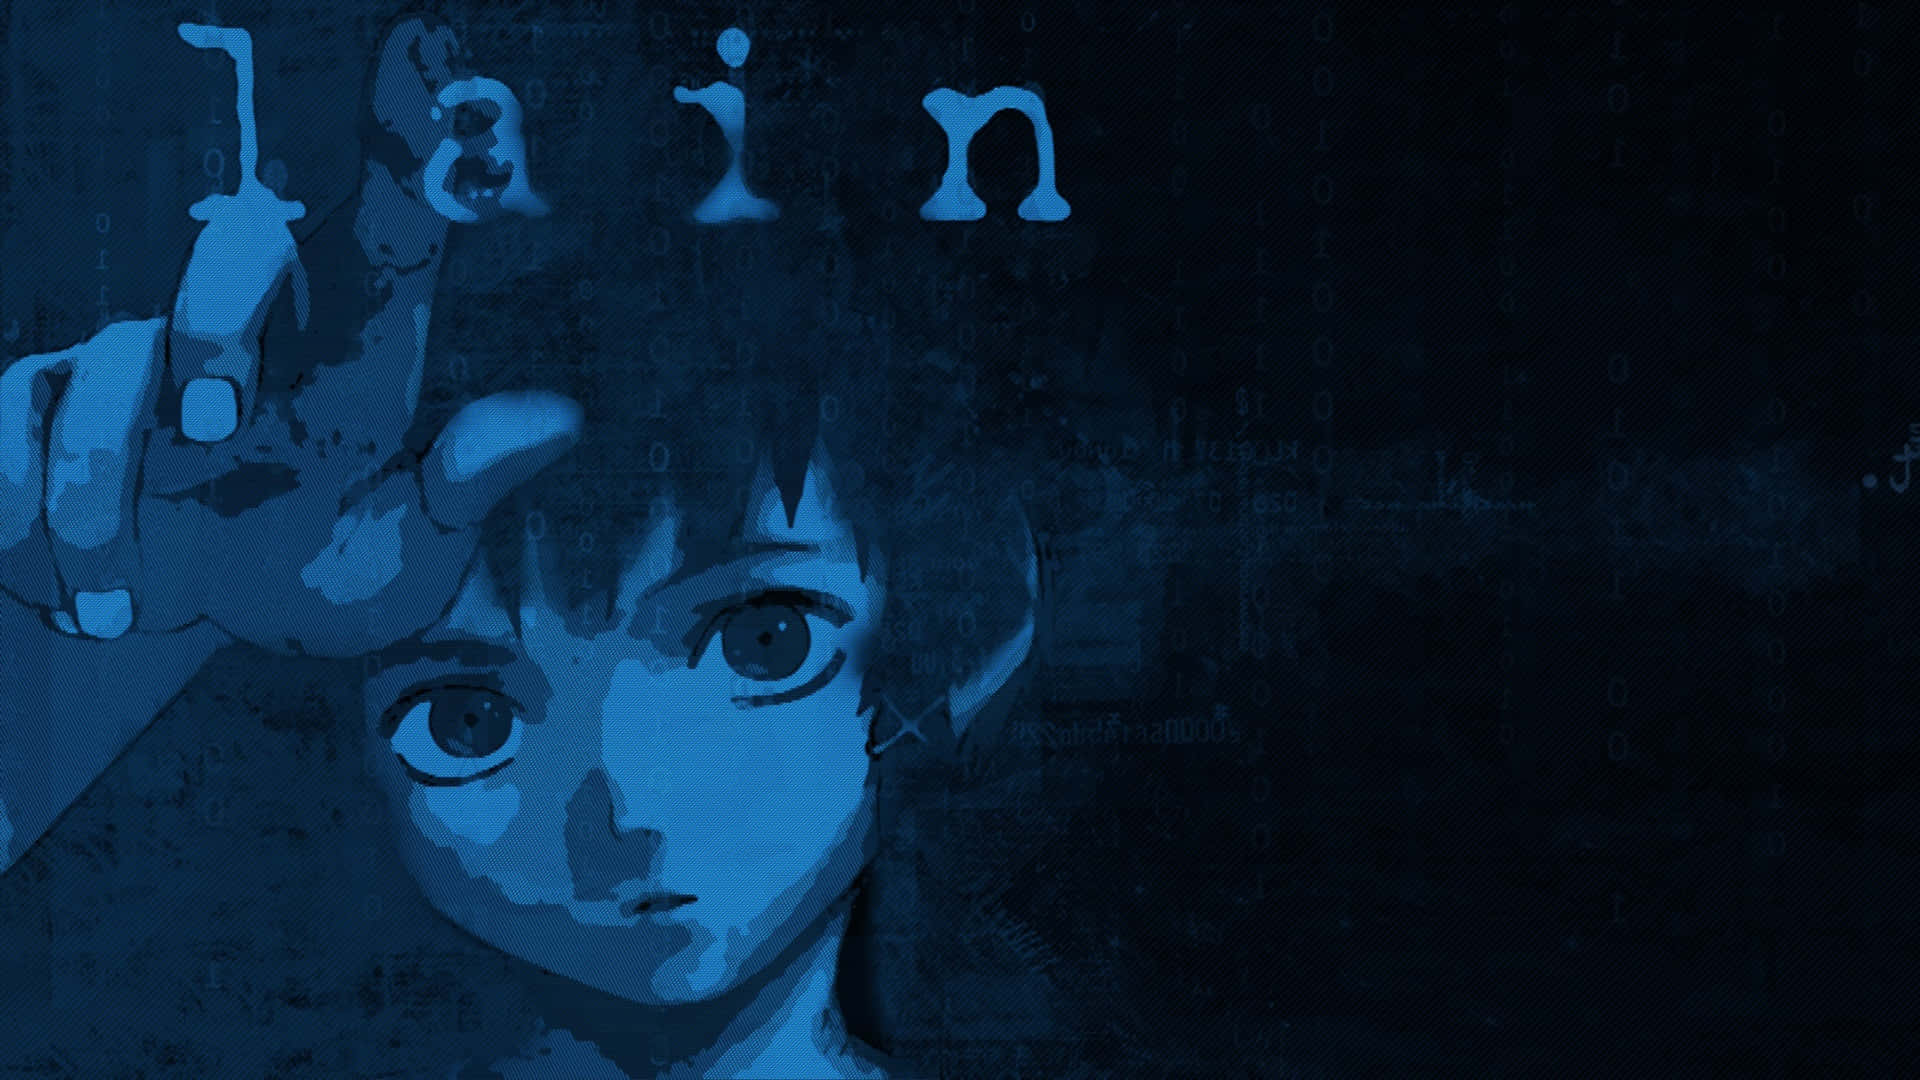 Serial Experiments Lain: The Breaking Point Wallpaper